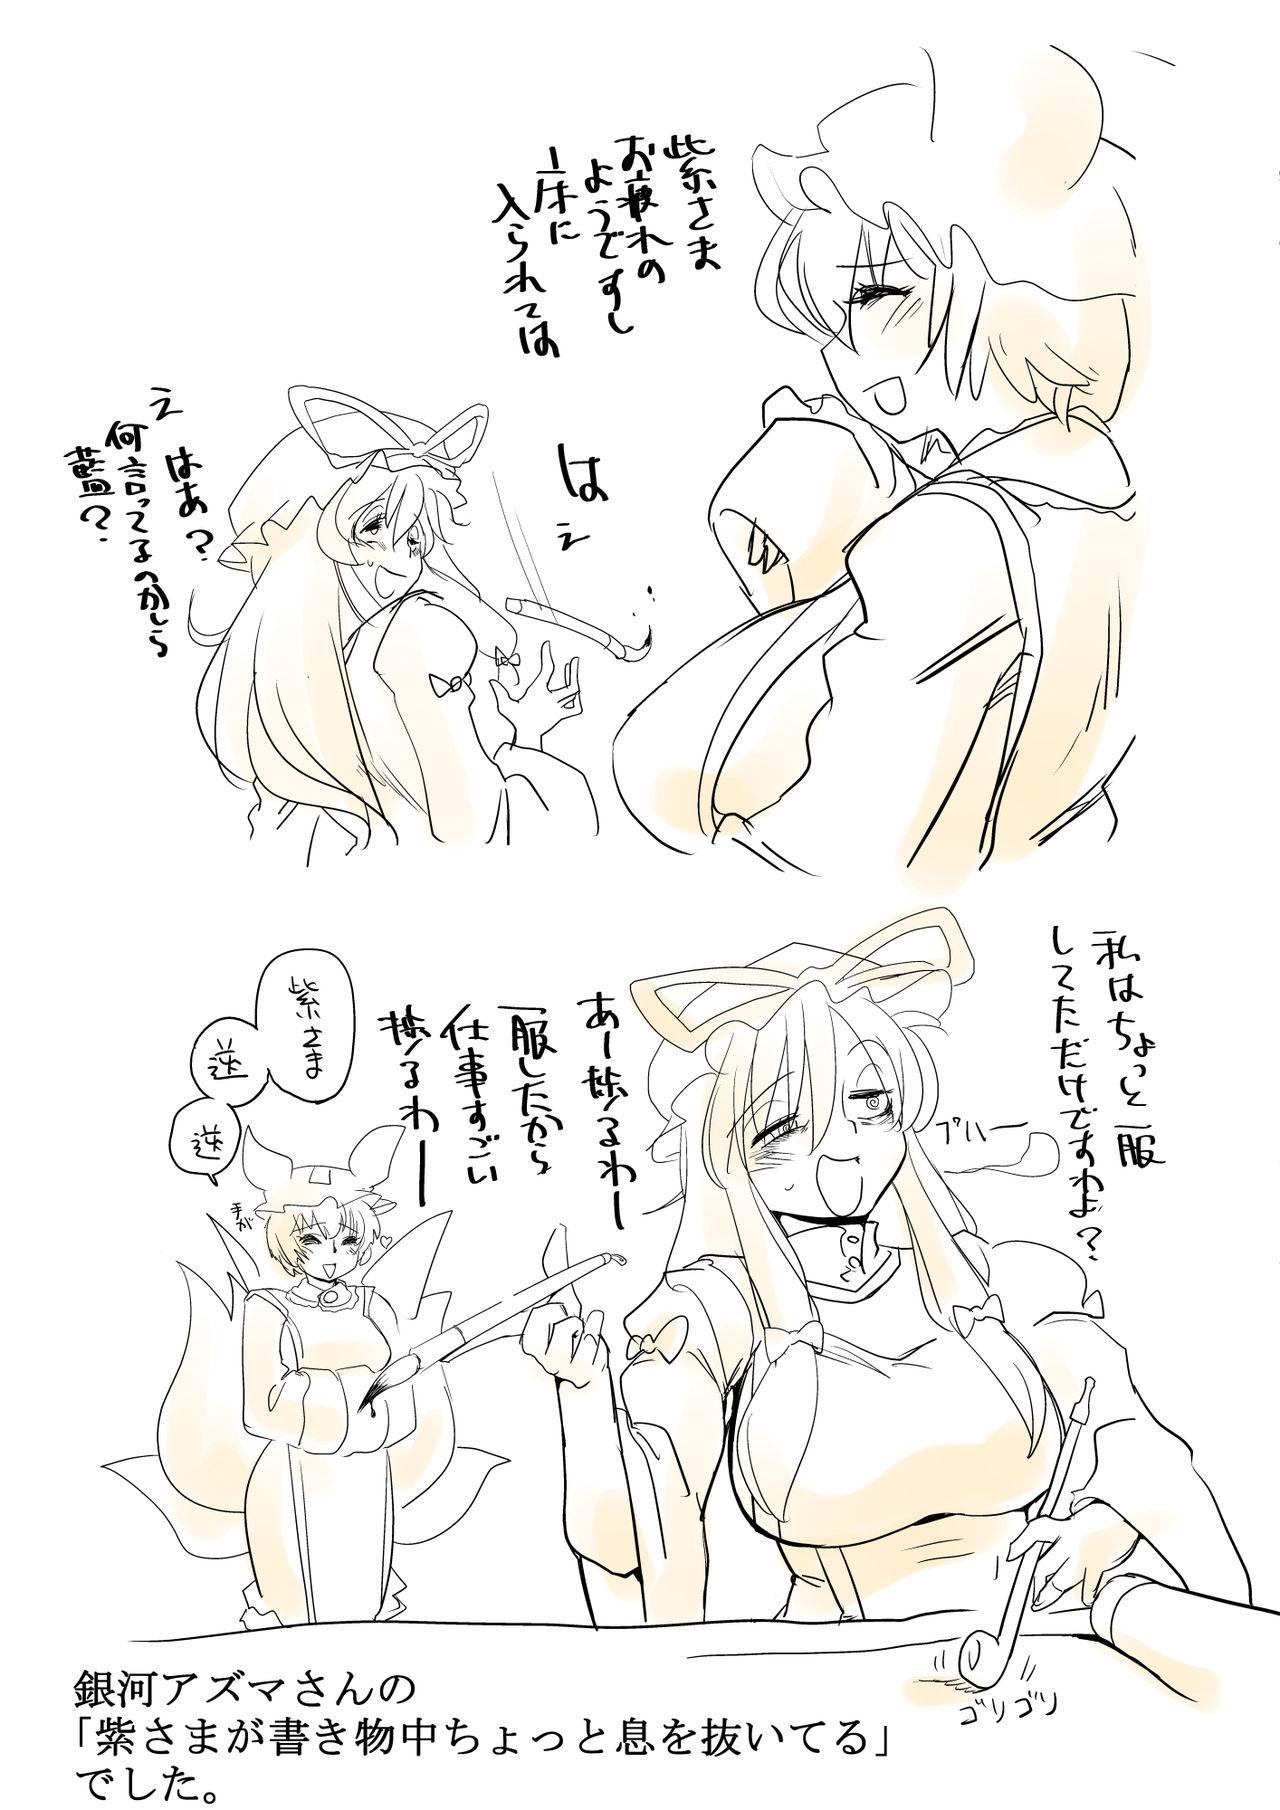 Perfect Butt Touhou Request Gashuu Sono 1 - Touhou project Stripping - Page 4